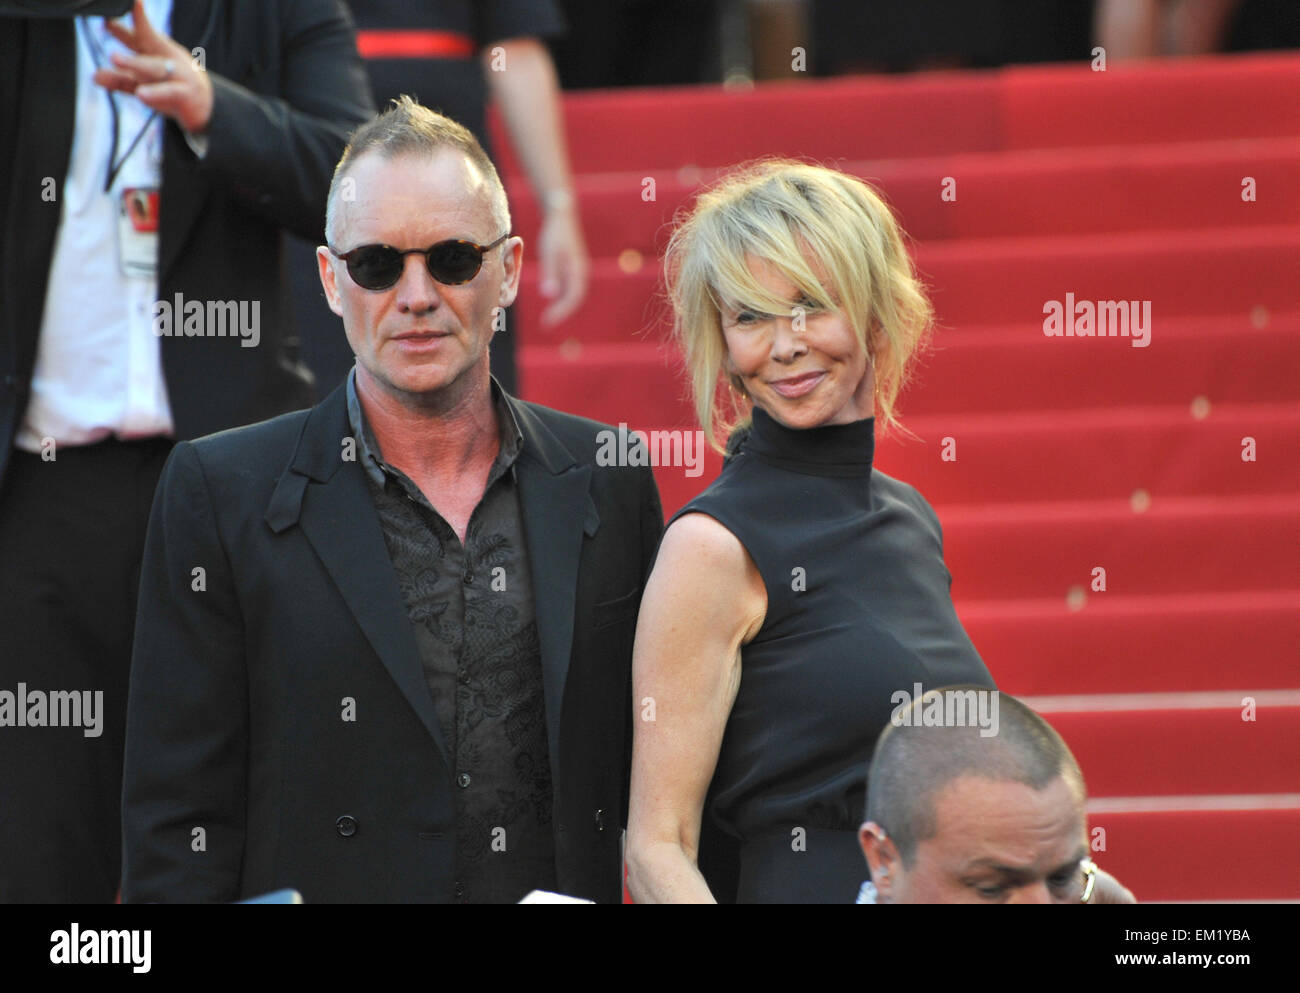 CANNES, FRANCE - MAY 26, 2012: Sting & Trudie Styler at the gala screening of 'Mud' in Cannes. May 26, 2012 Cannes, France Stock Photo